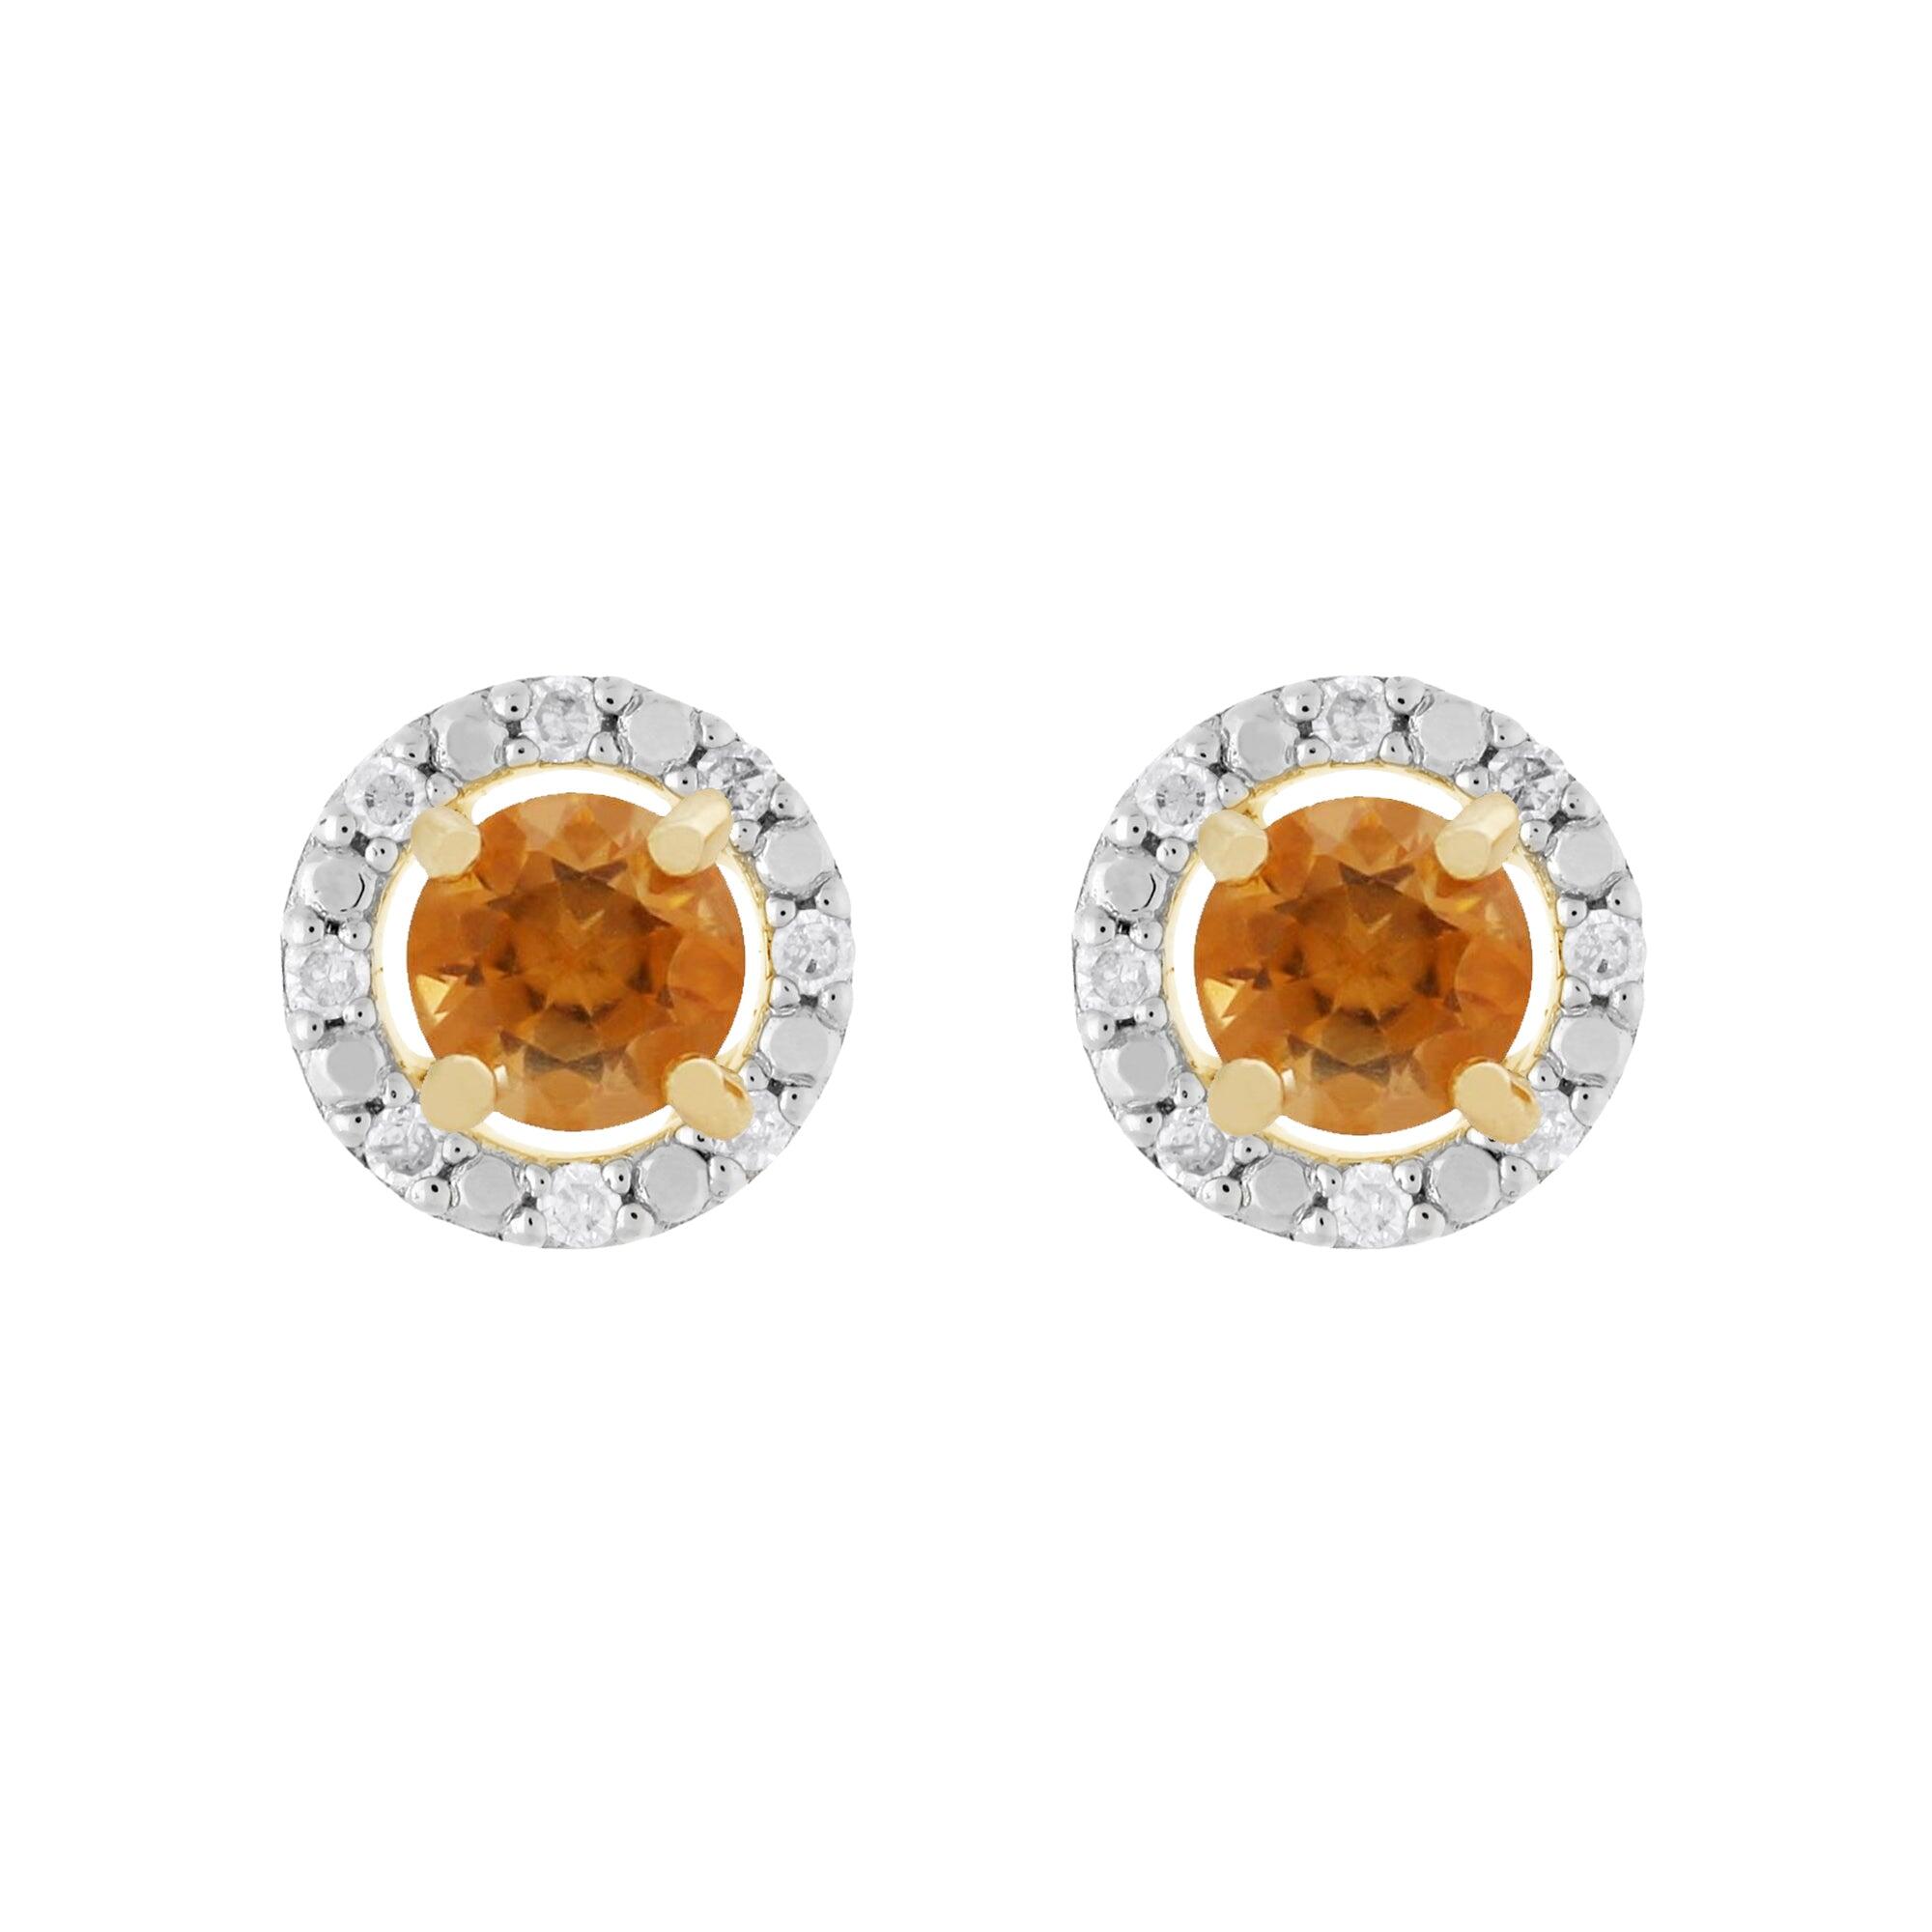 Classic Round Citrine Stud Earrings with Detachable Diamond Round Earrings Jacket Set in 9ct Yellow Gold